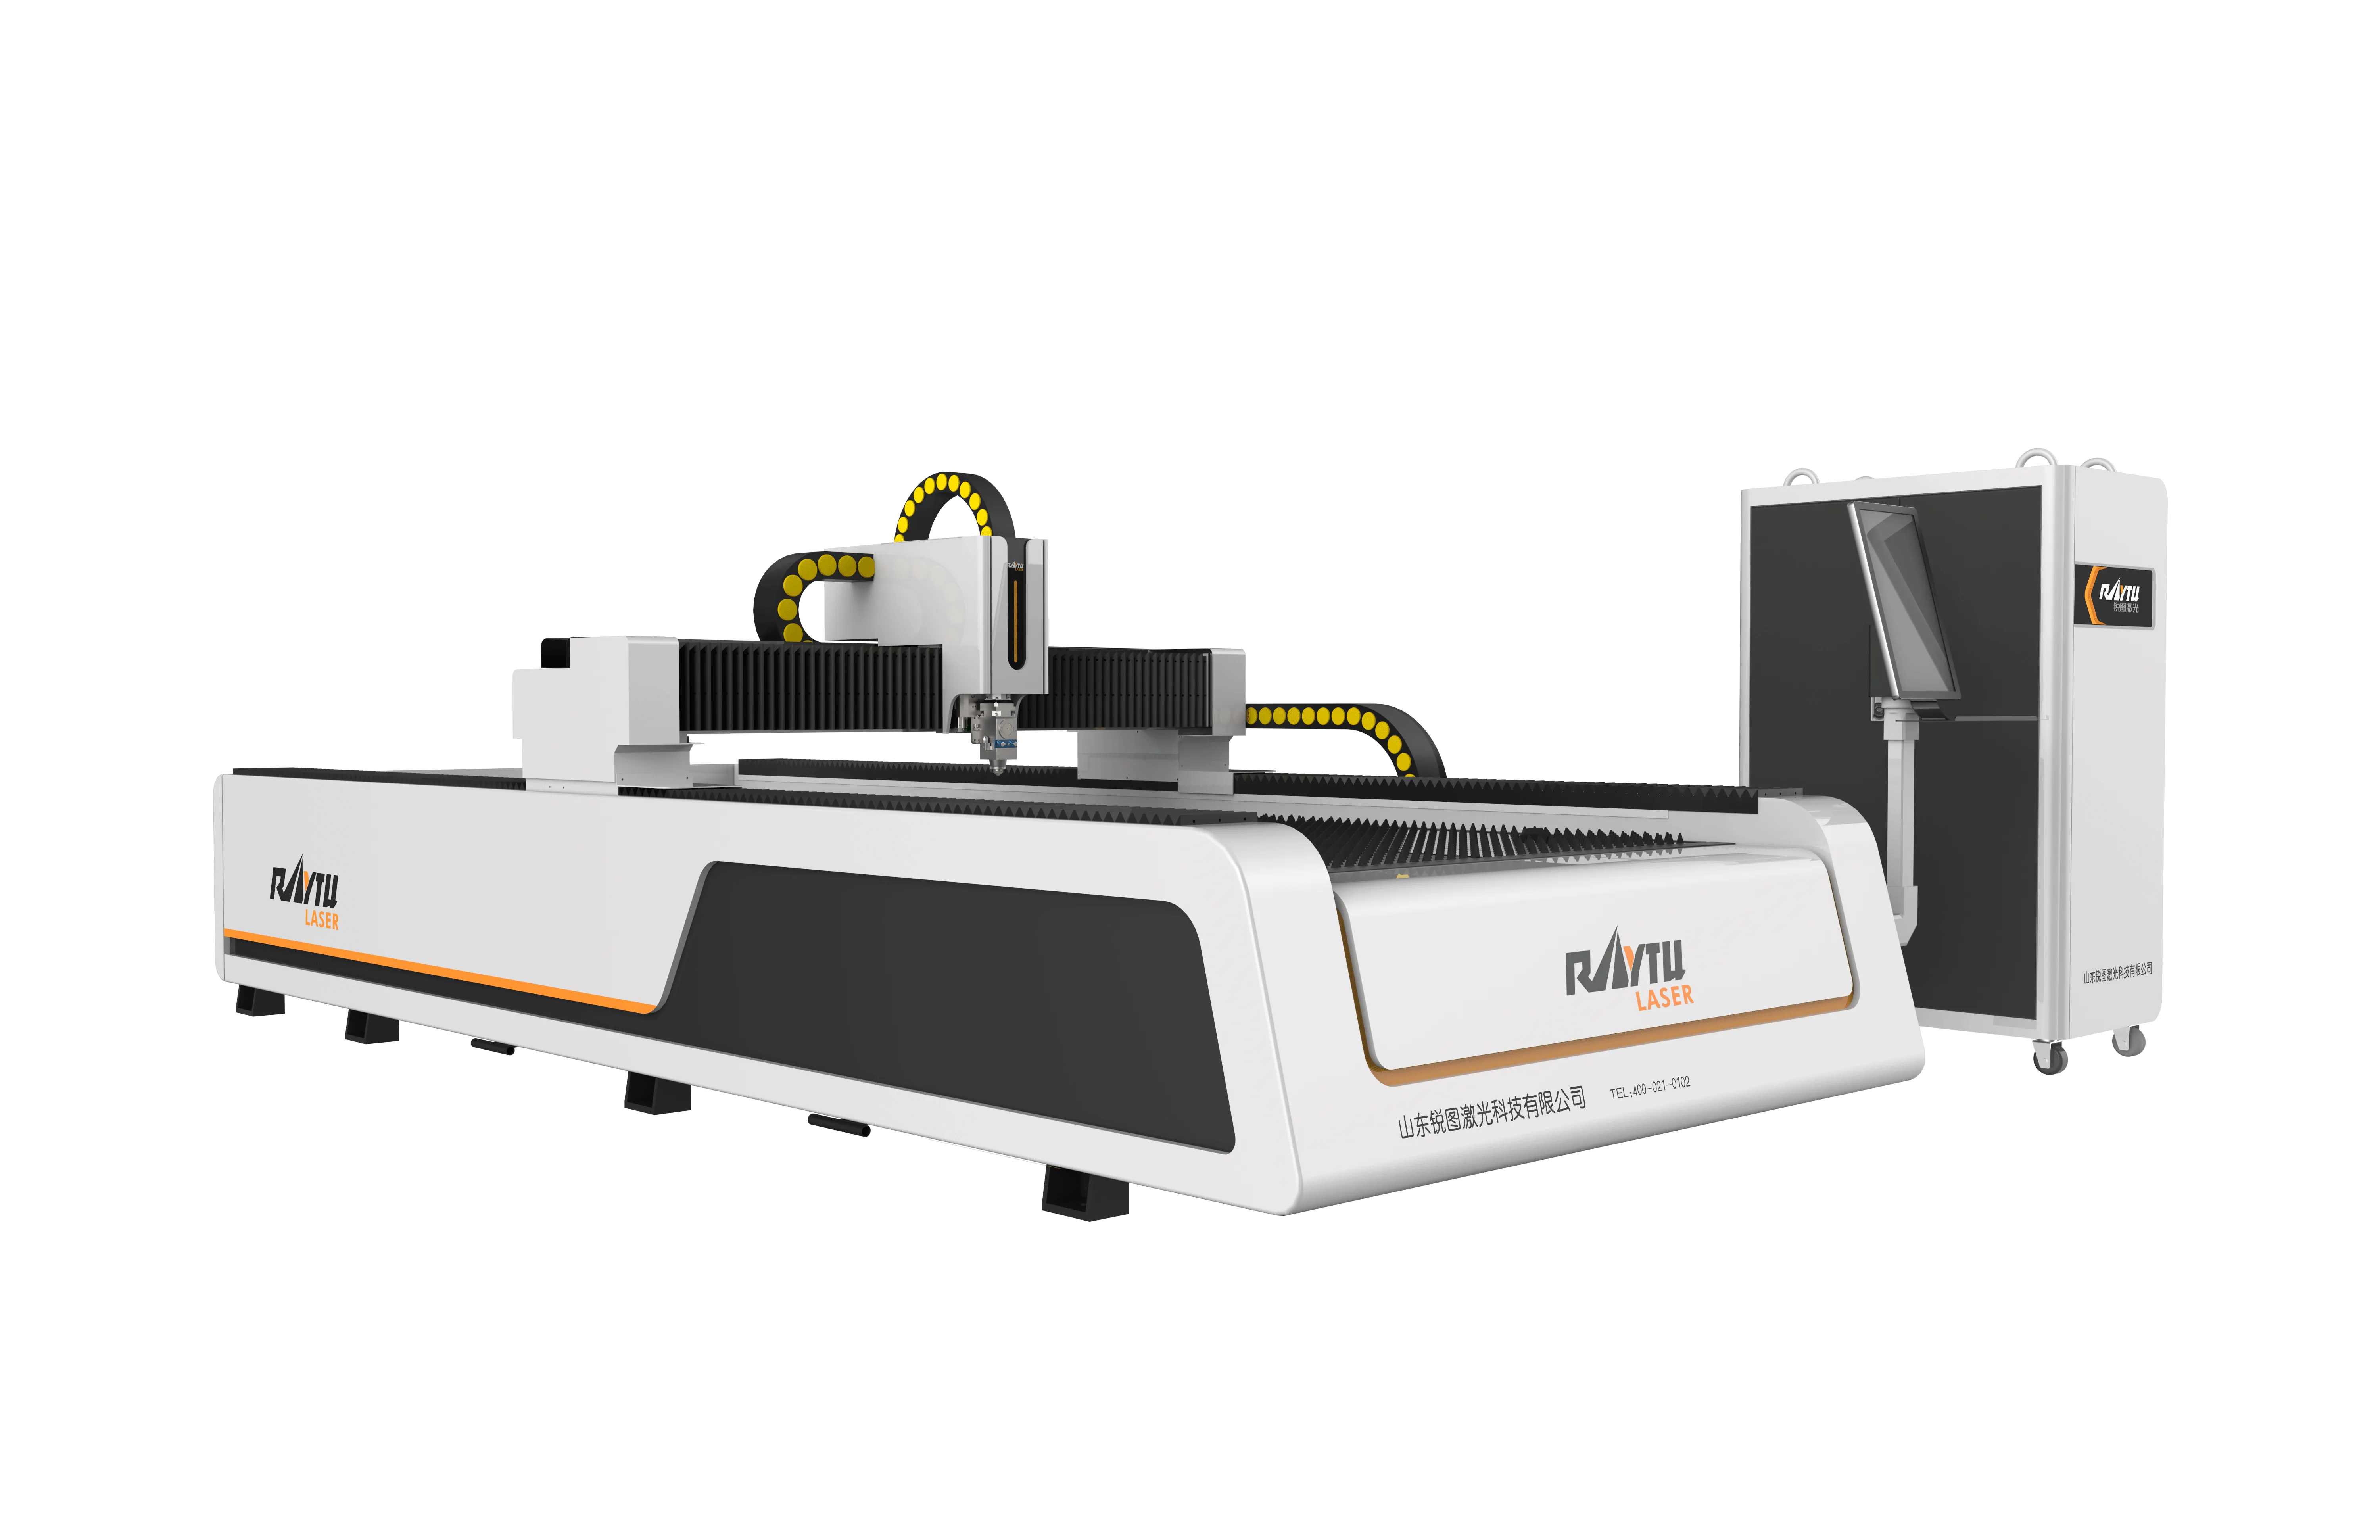 High Power Single Platform Fiber Laser Cutting Machine RT-H manufacturers and suppliers in China